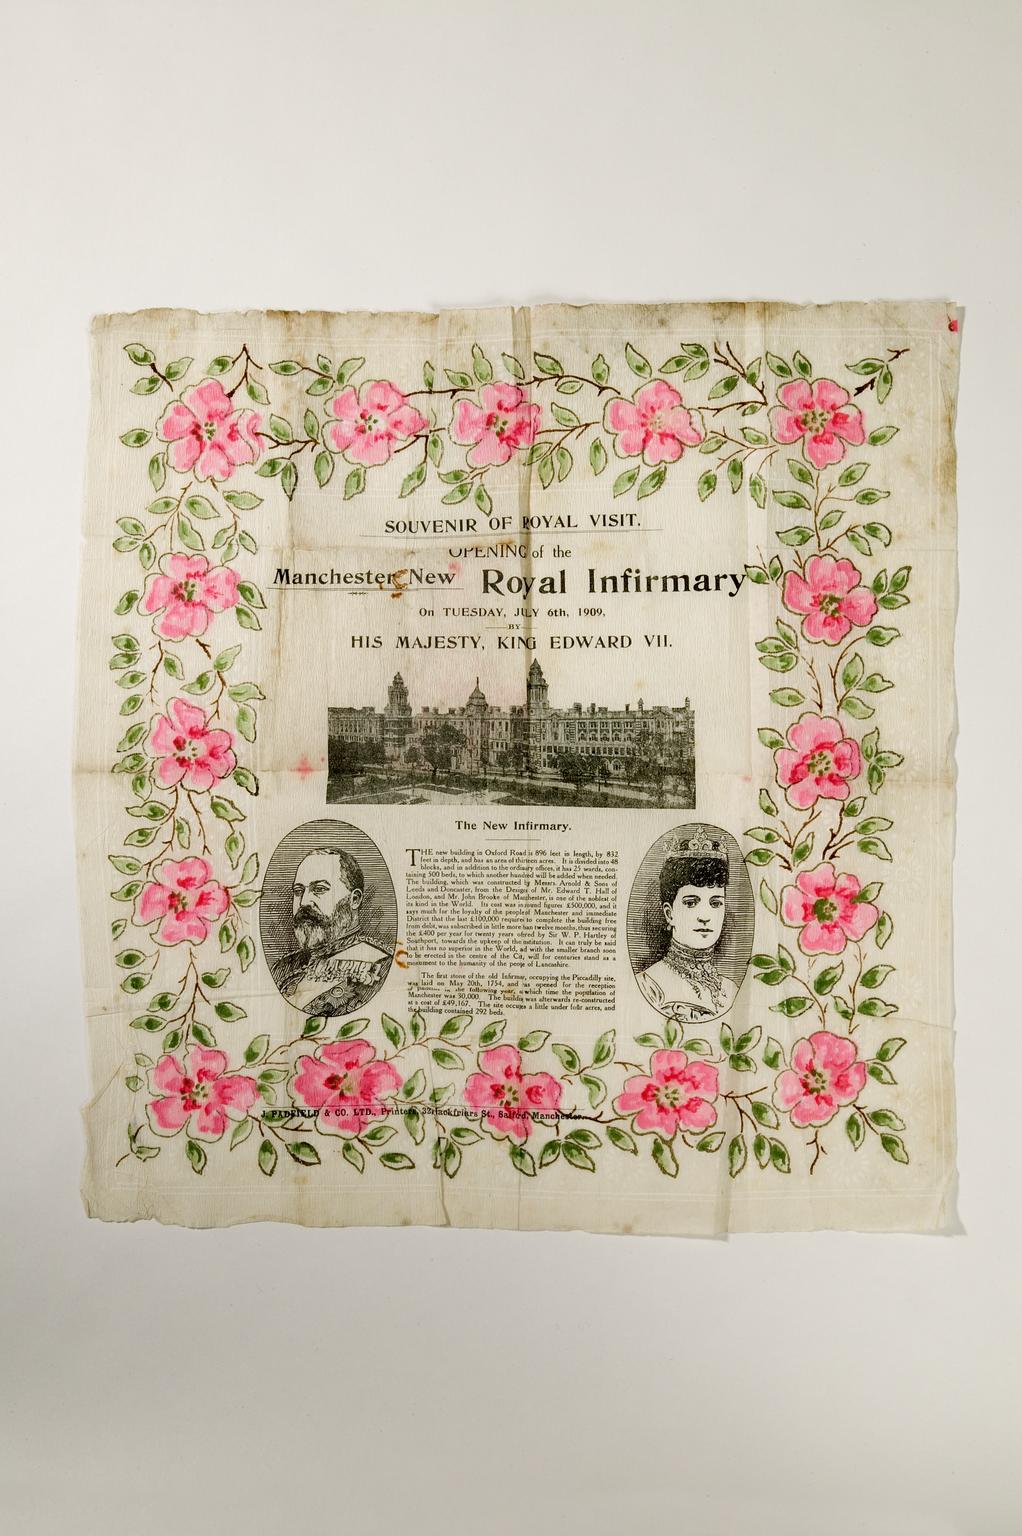 Commemorative serviette produced to celebrate the opening of the Manchester Royal Infirmary by King Edward VII and Queen Alexandra in 1909